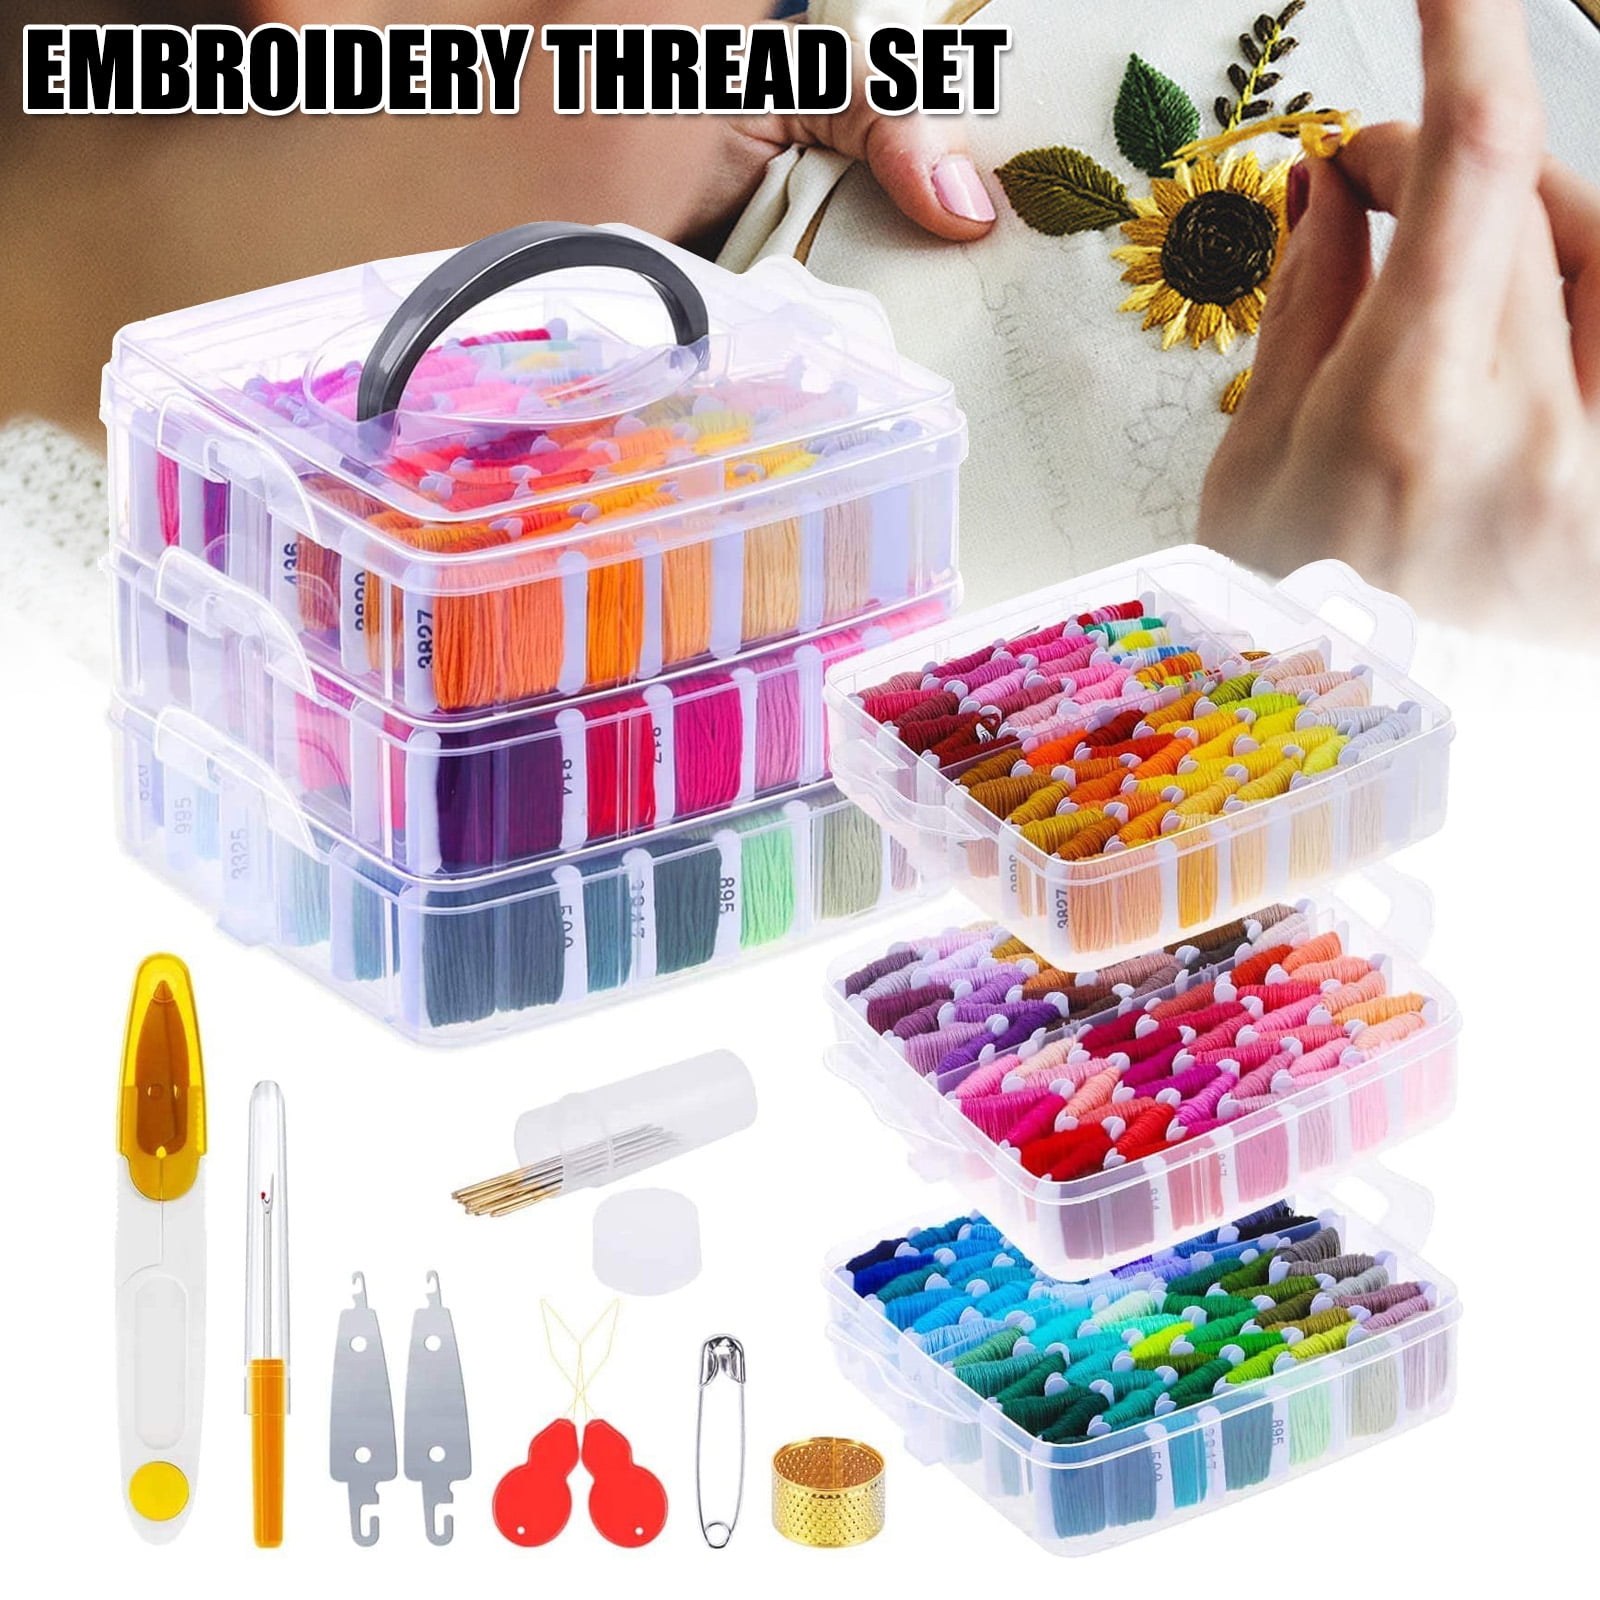 Hesroicy Embroidery Floss Organizer Eye-catching Multi Holes Wooden Rose  Design Cross Stitch Floss Thread Holder for Home